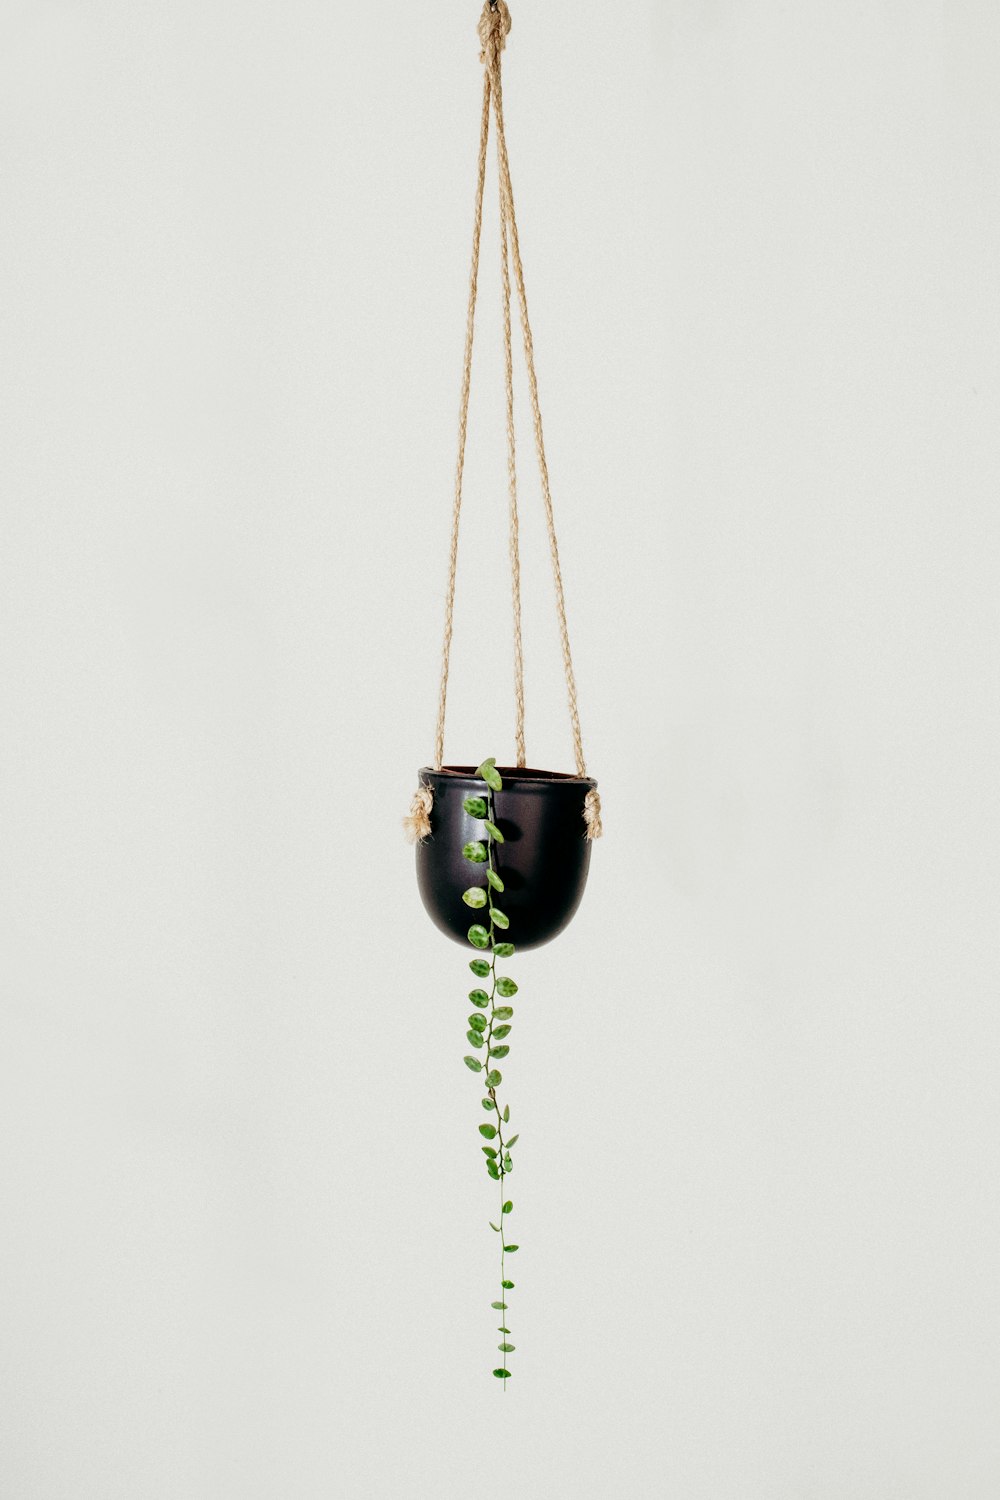 green and black hanging decor